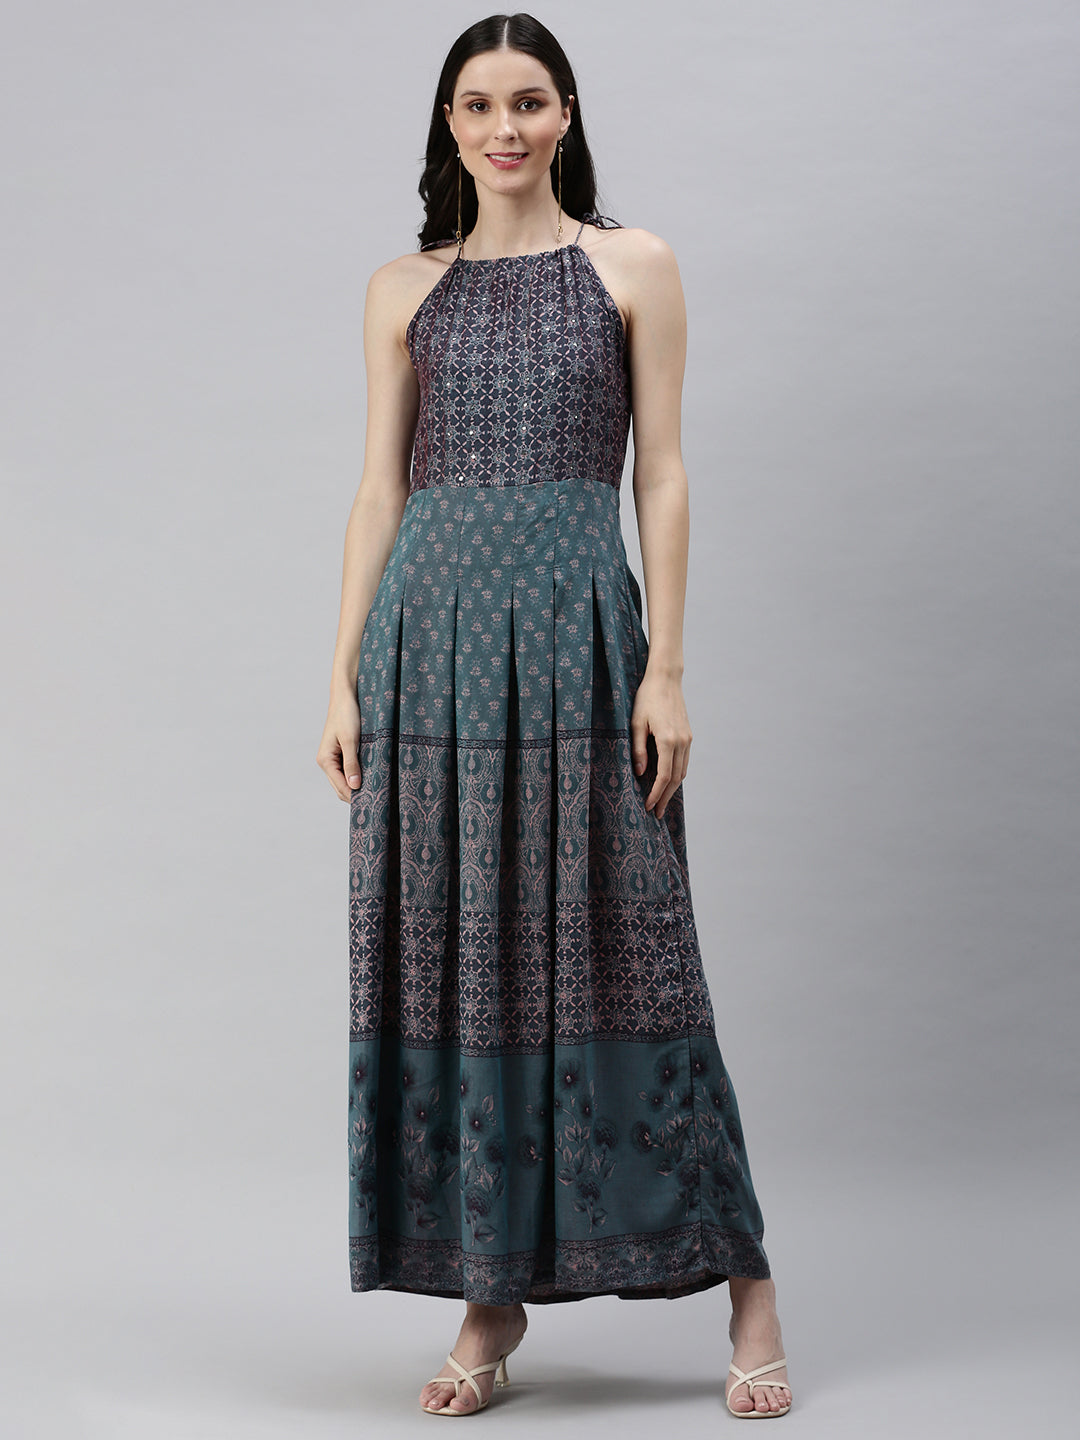 Women Turquoise Blue Printed A-Line Dress